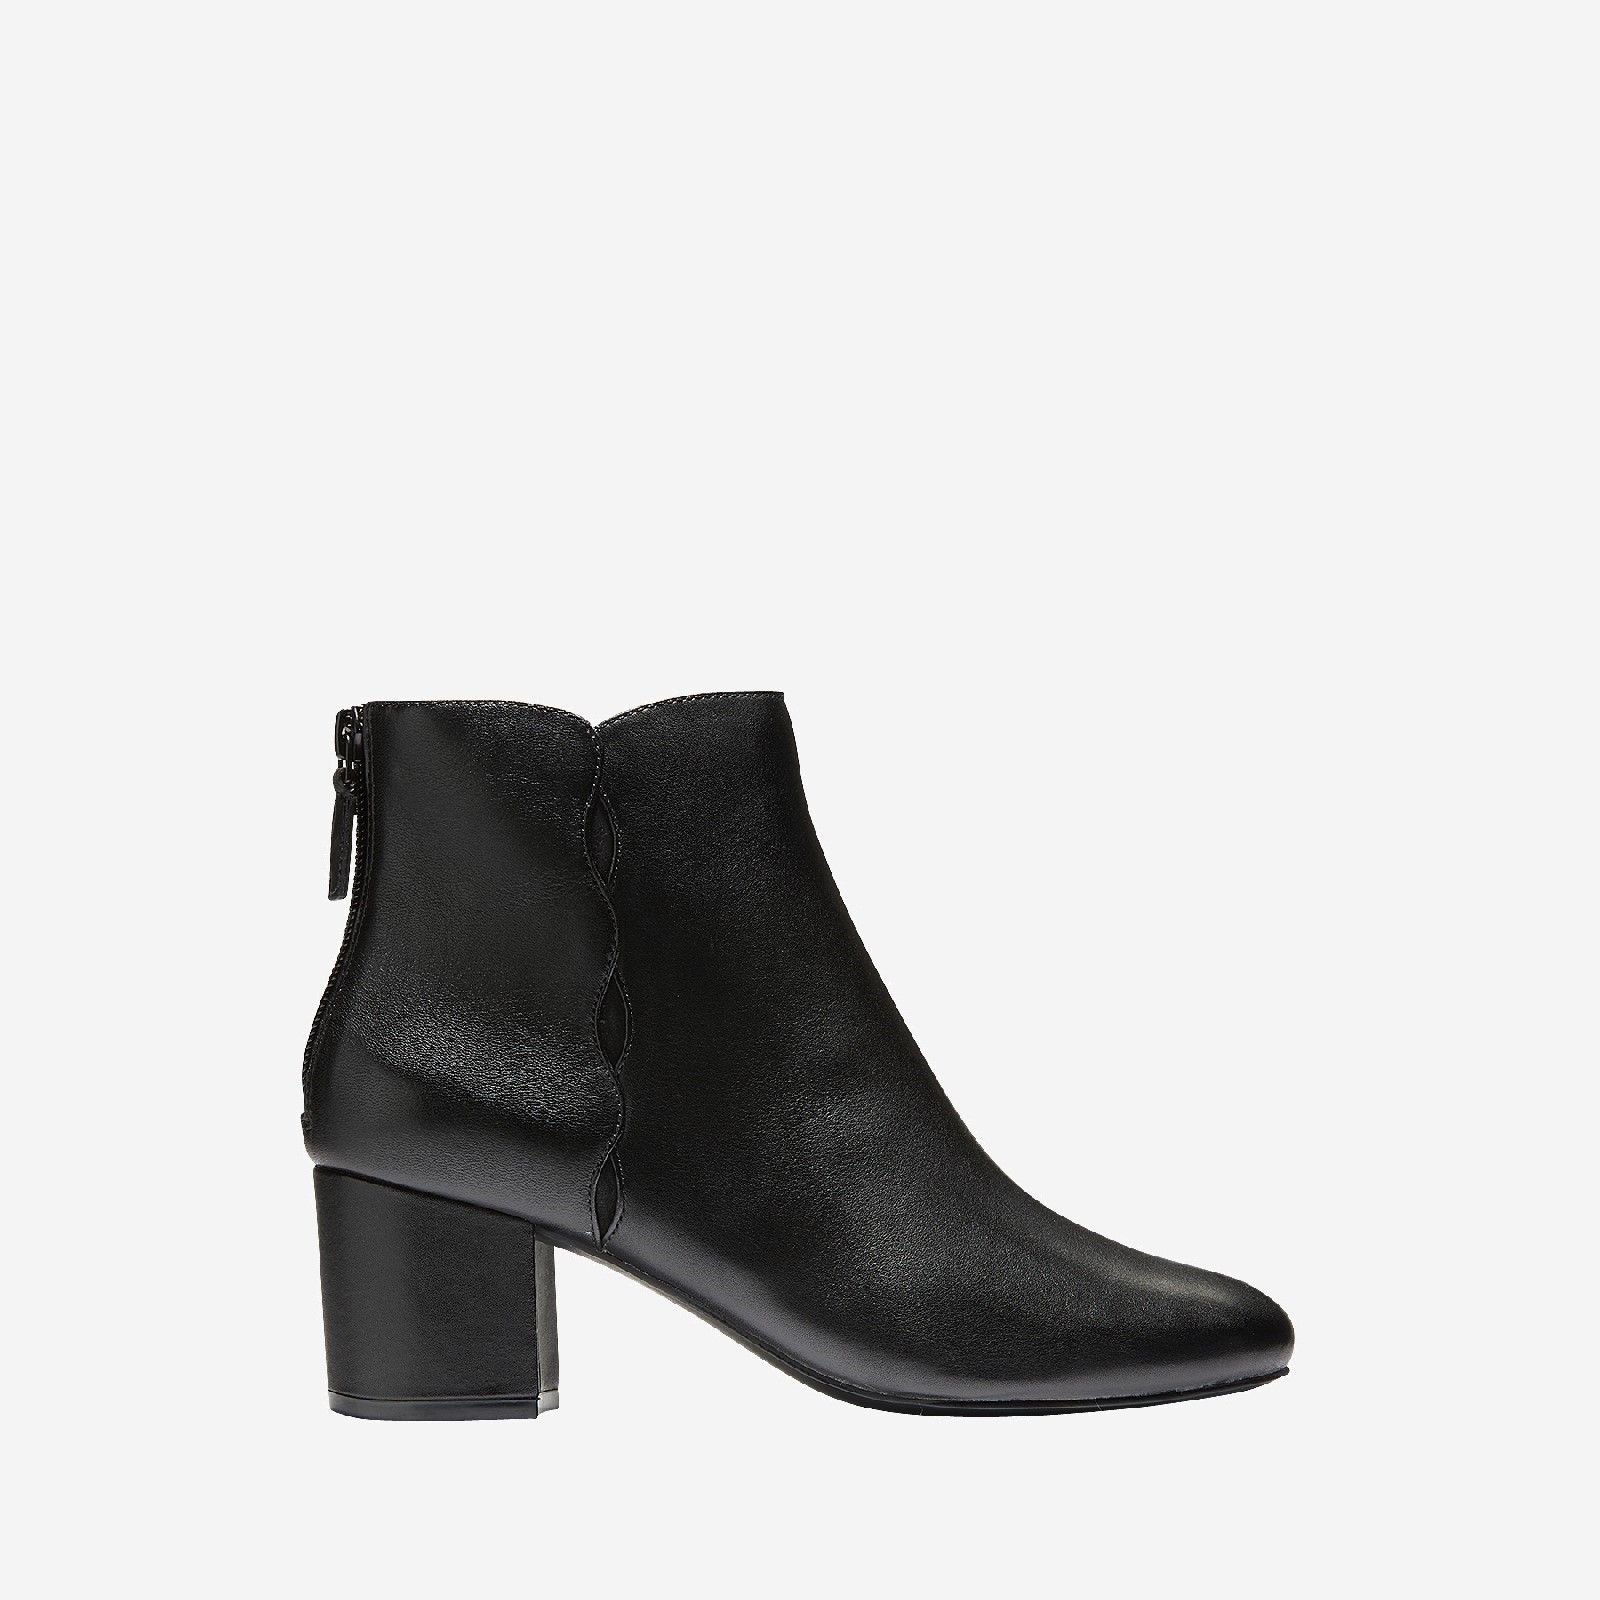 Designed with GRAND 360 technology, this bootie will be your go-to, everyday bootie that you can pair with any outfit. Leather upper with back zipper for easy entry..